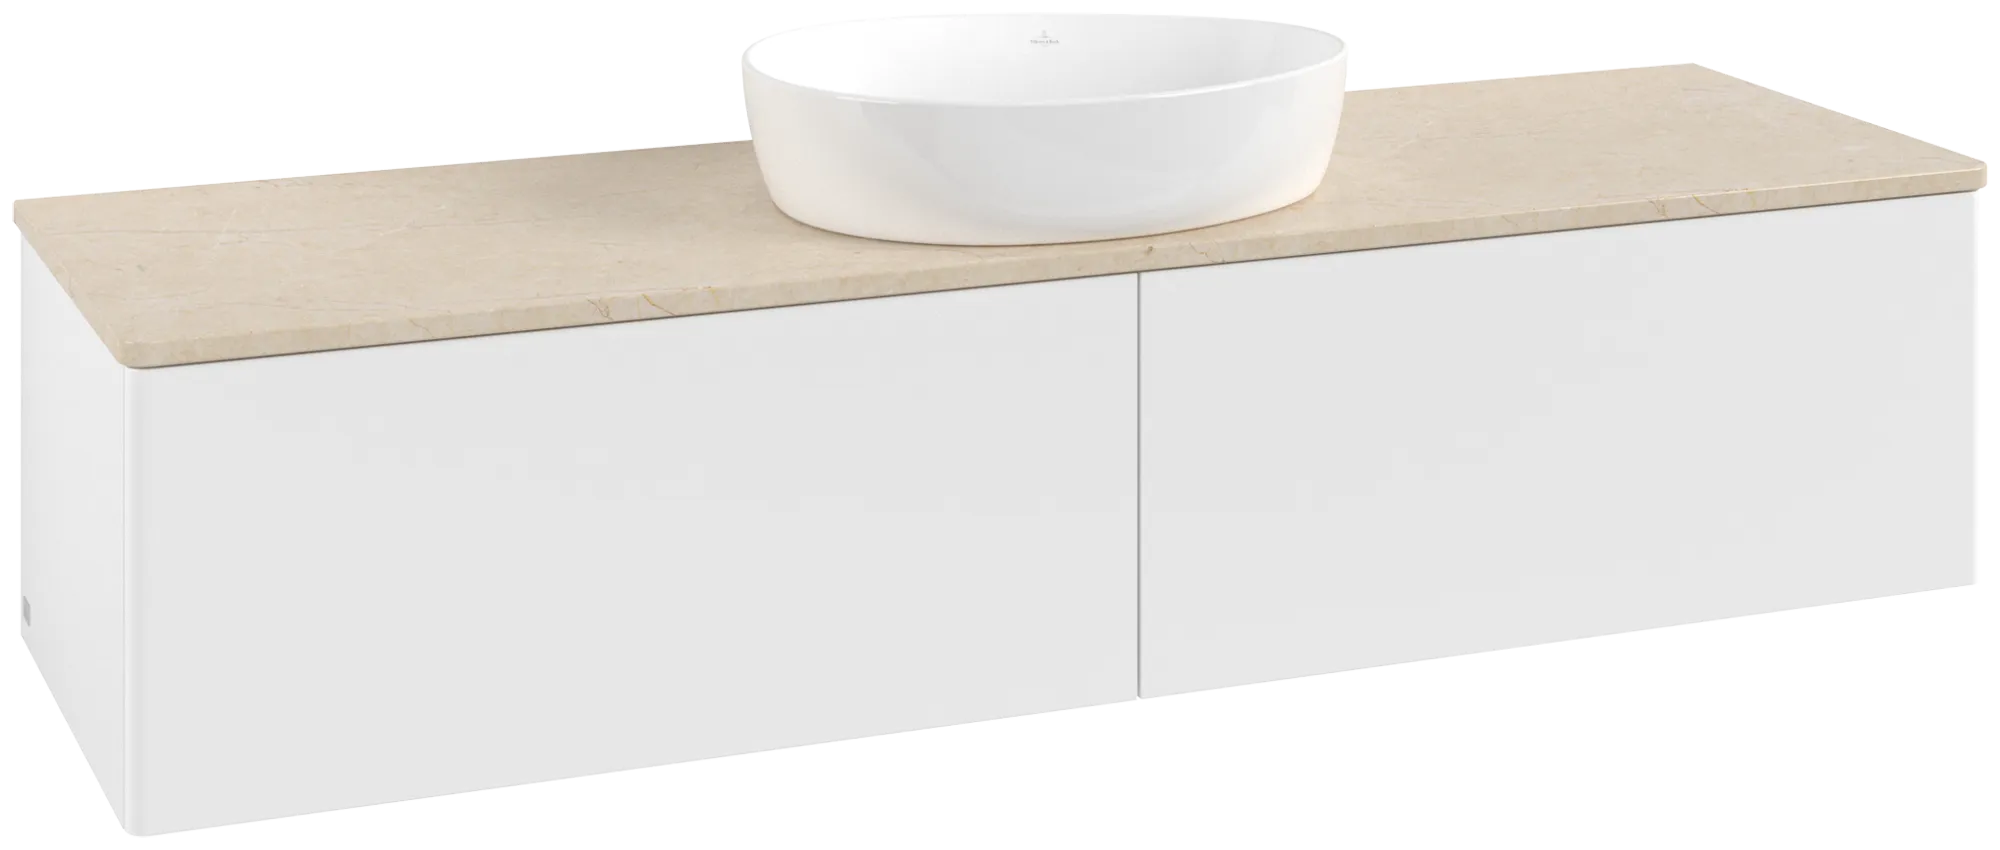 Picture of VILLEROY BOCH Antao Vanity unit, with lighting, 2 pull-out compartments, 1600 x 360 x 500 mm, Front without structure, White Matt Lacquer / Botticino #L36013MT